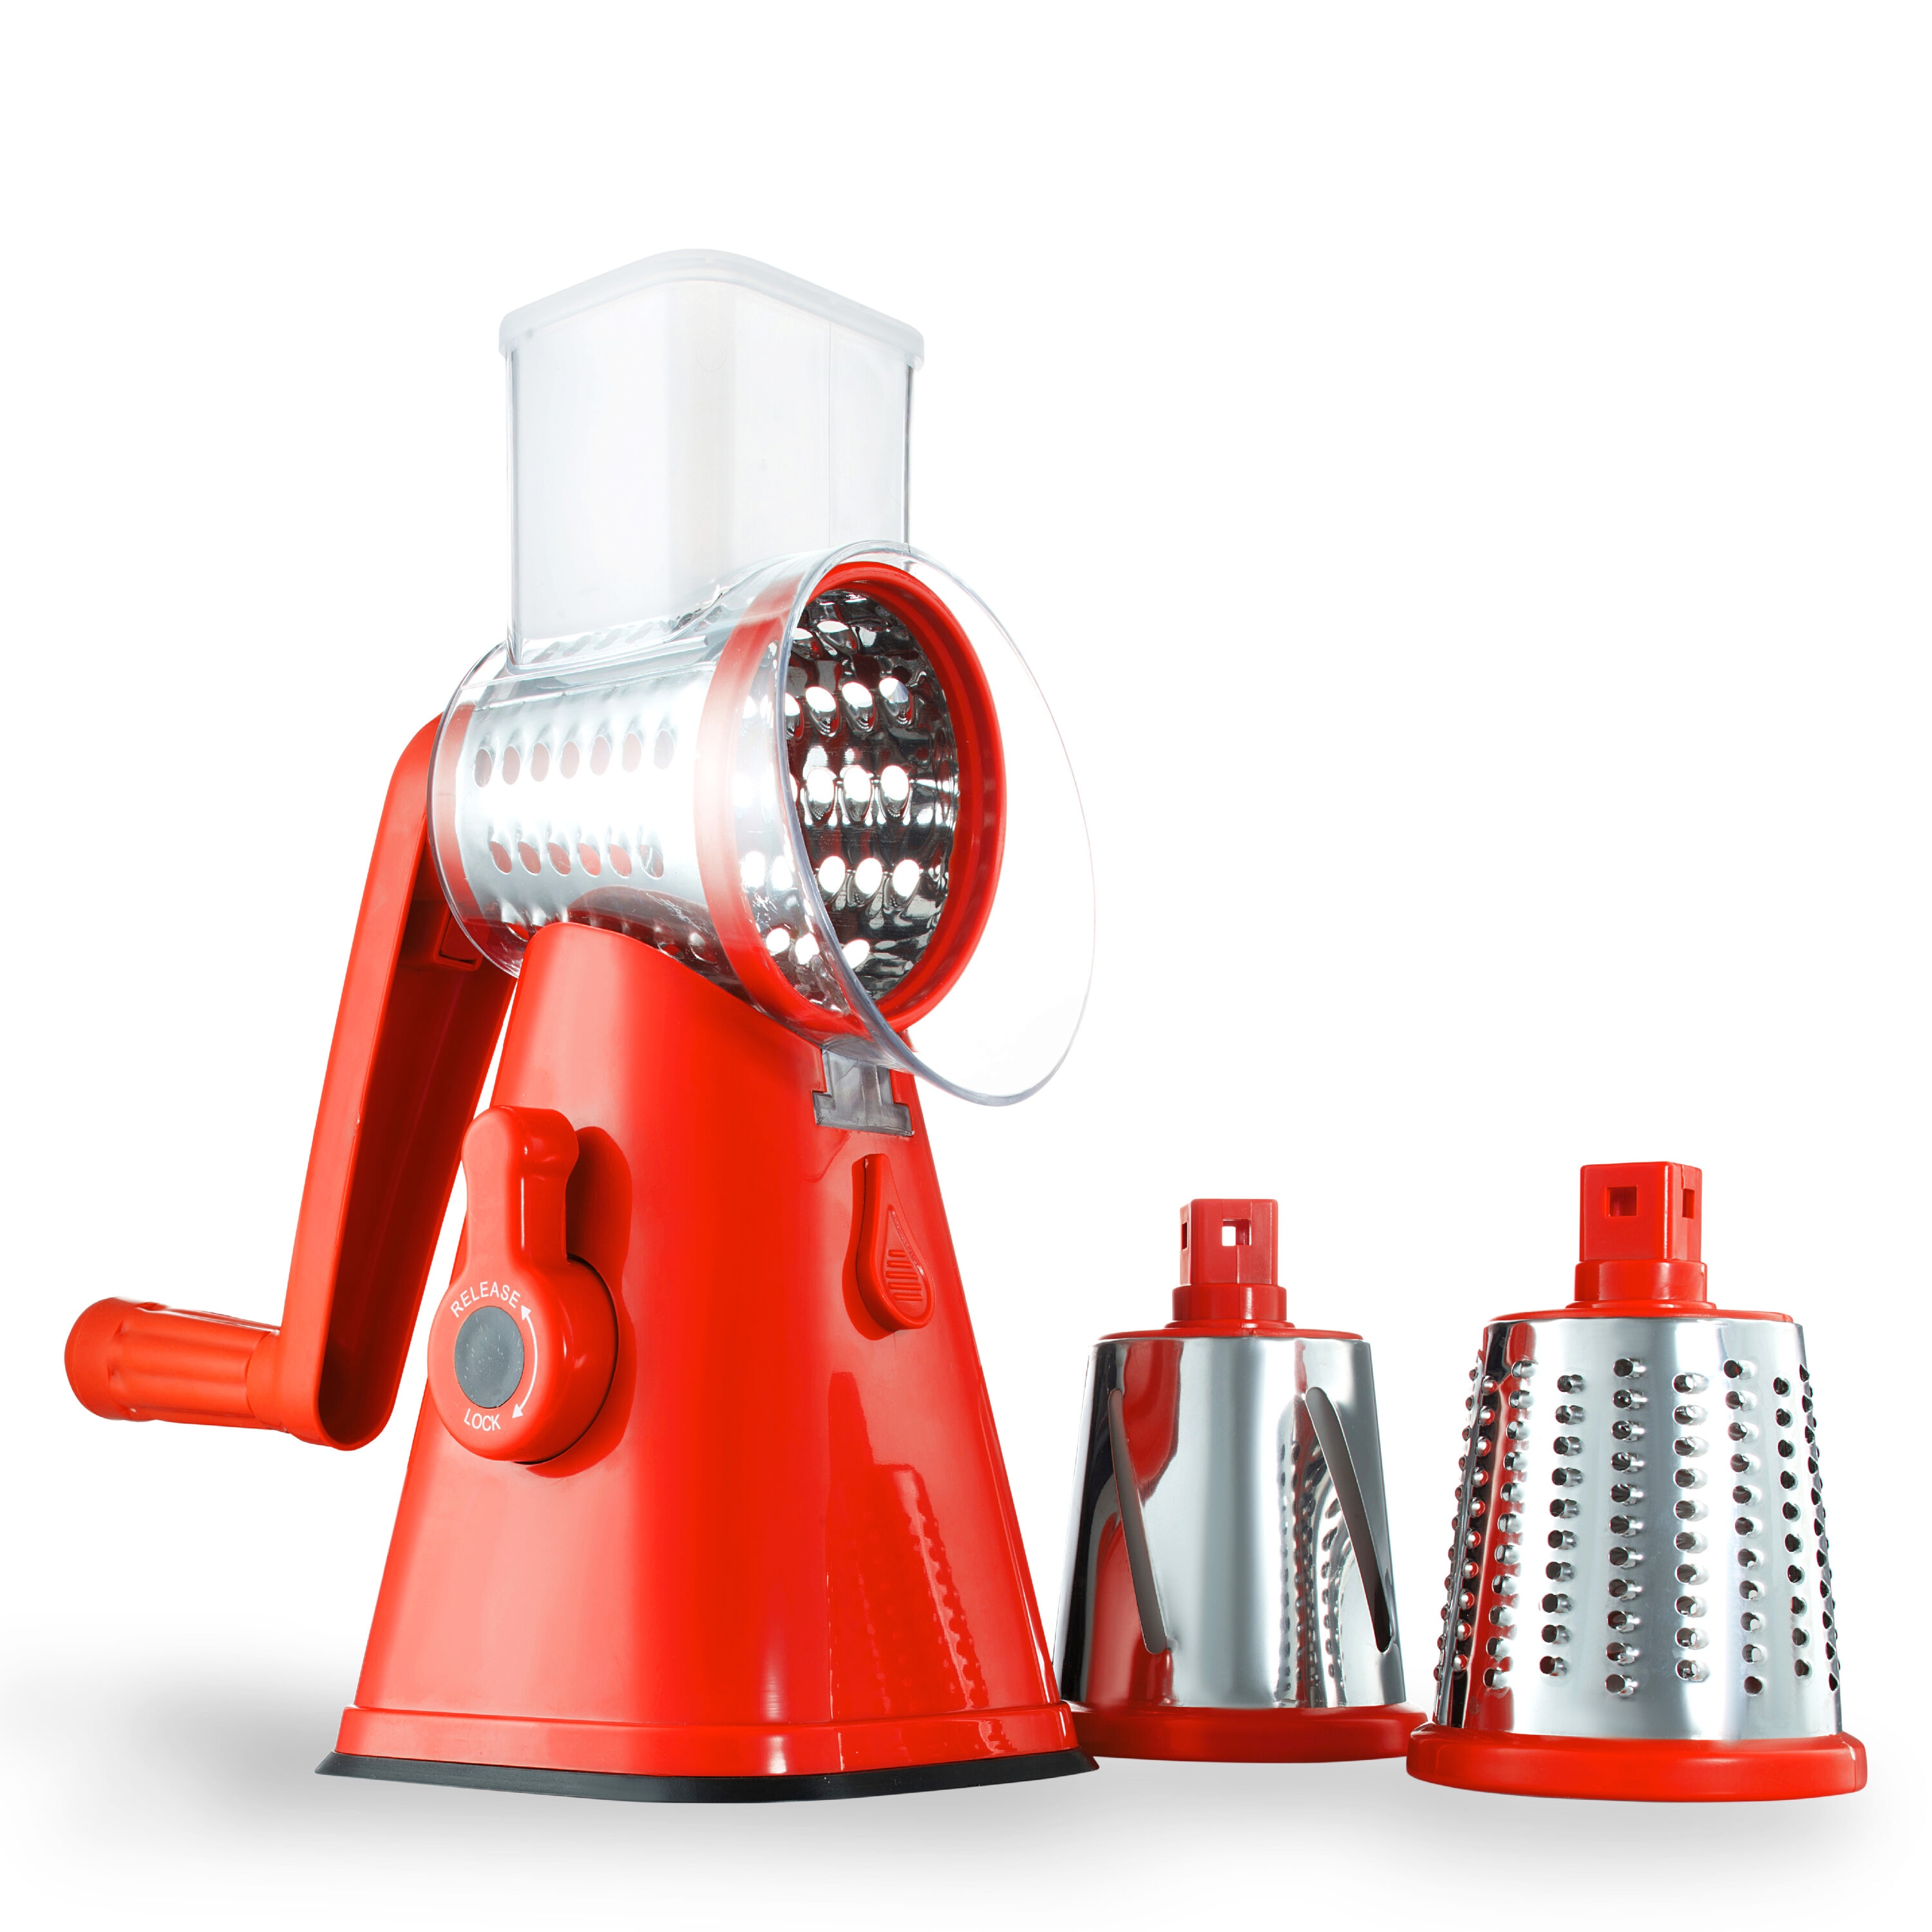 Mind Reader MindReader Rotary Drum Cheese Grater, Red, Knuckle Up, Hand-Powered, Swift Slicing